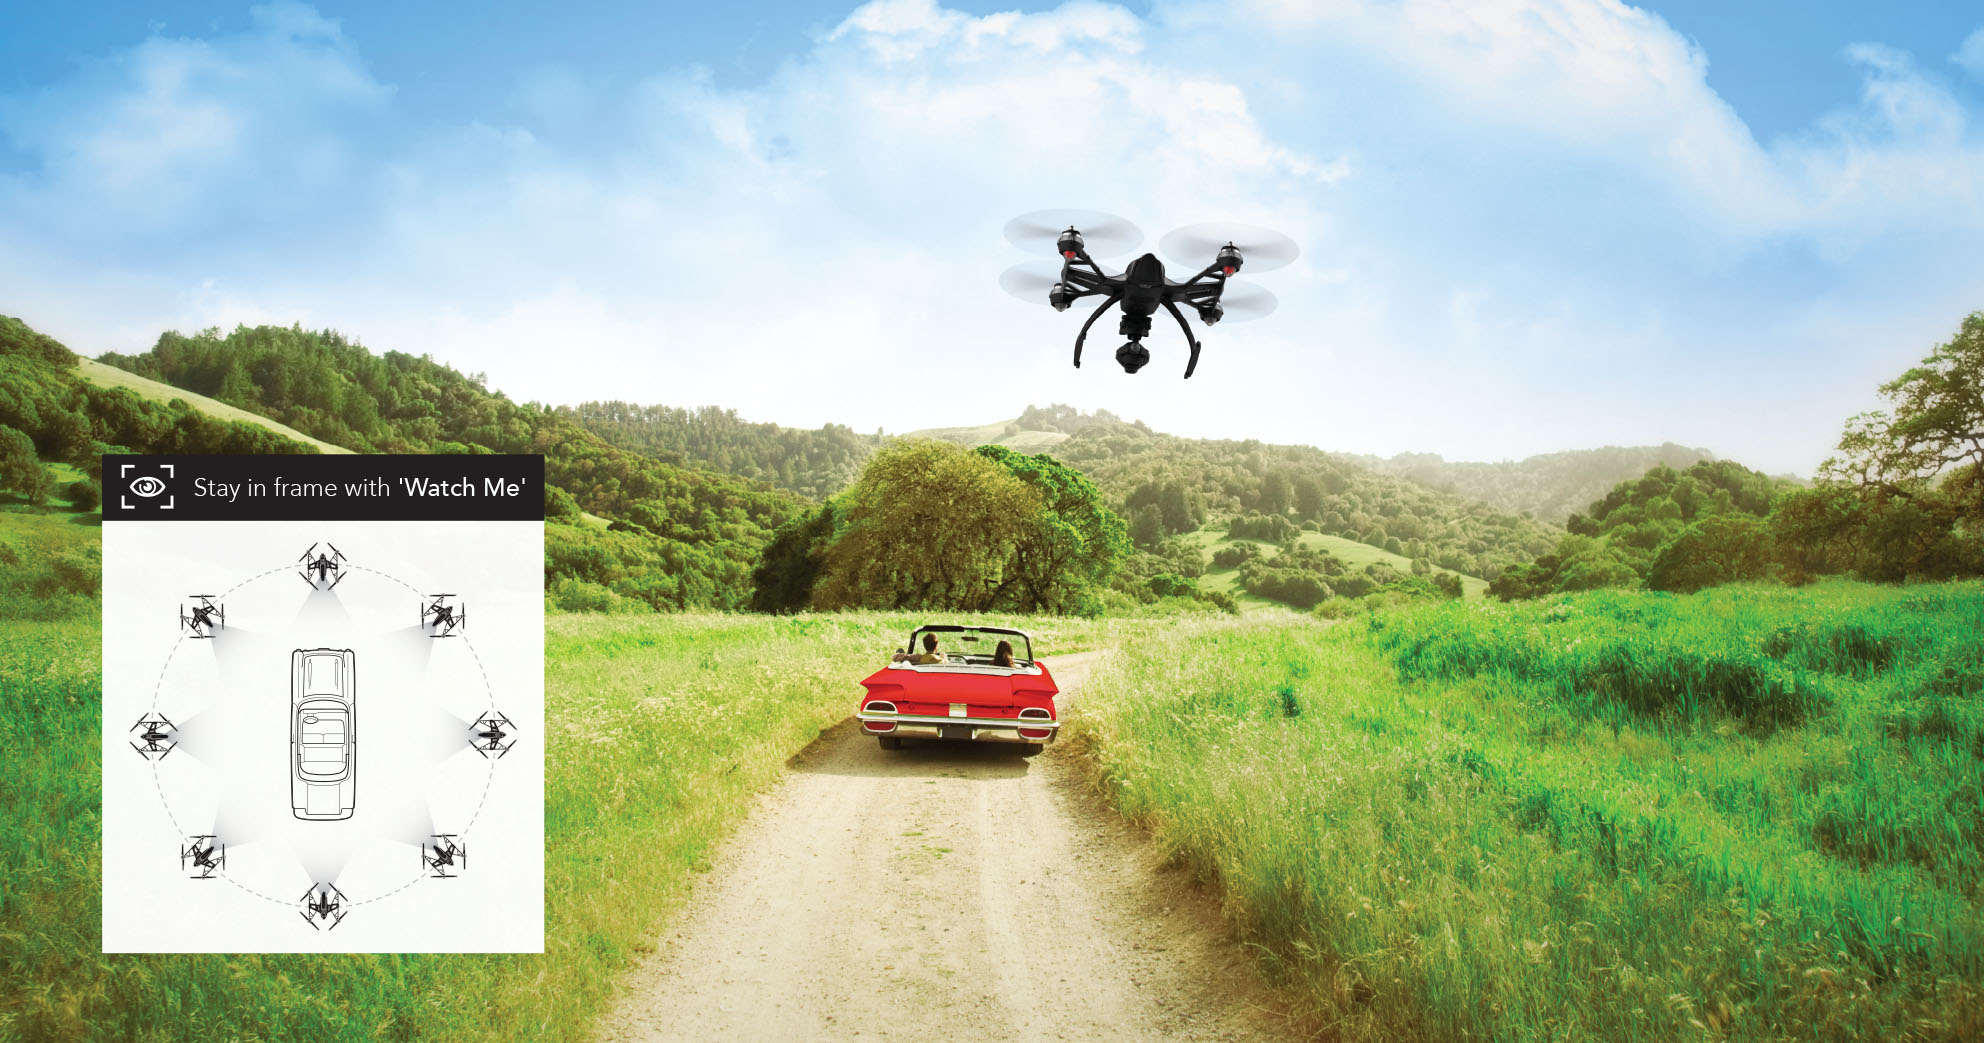 Take Flight with the Yuneec Typhoon Q500 4K Quadcopter Camera Drone